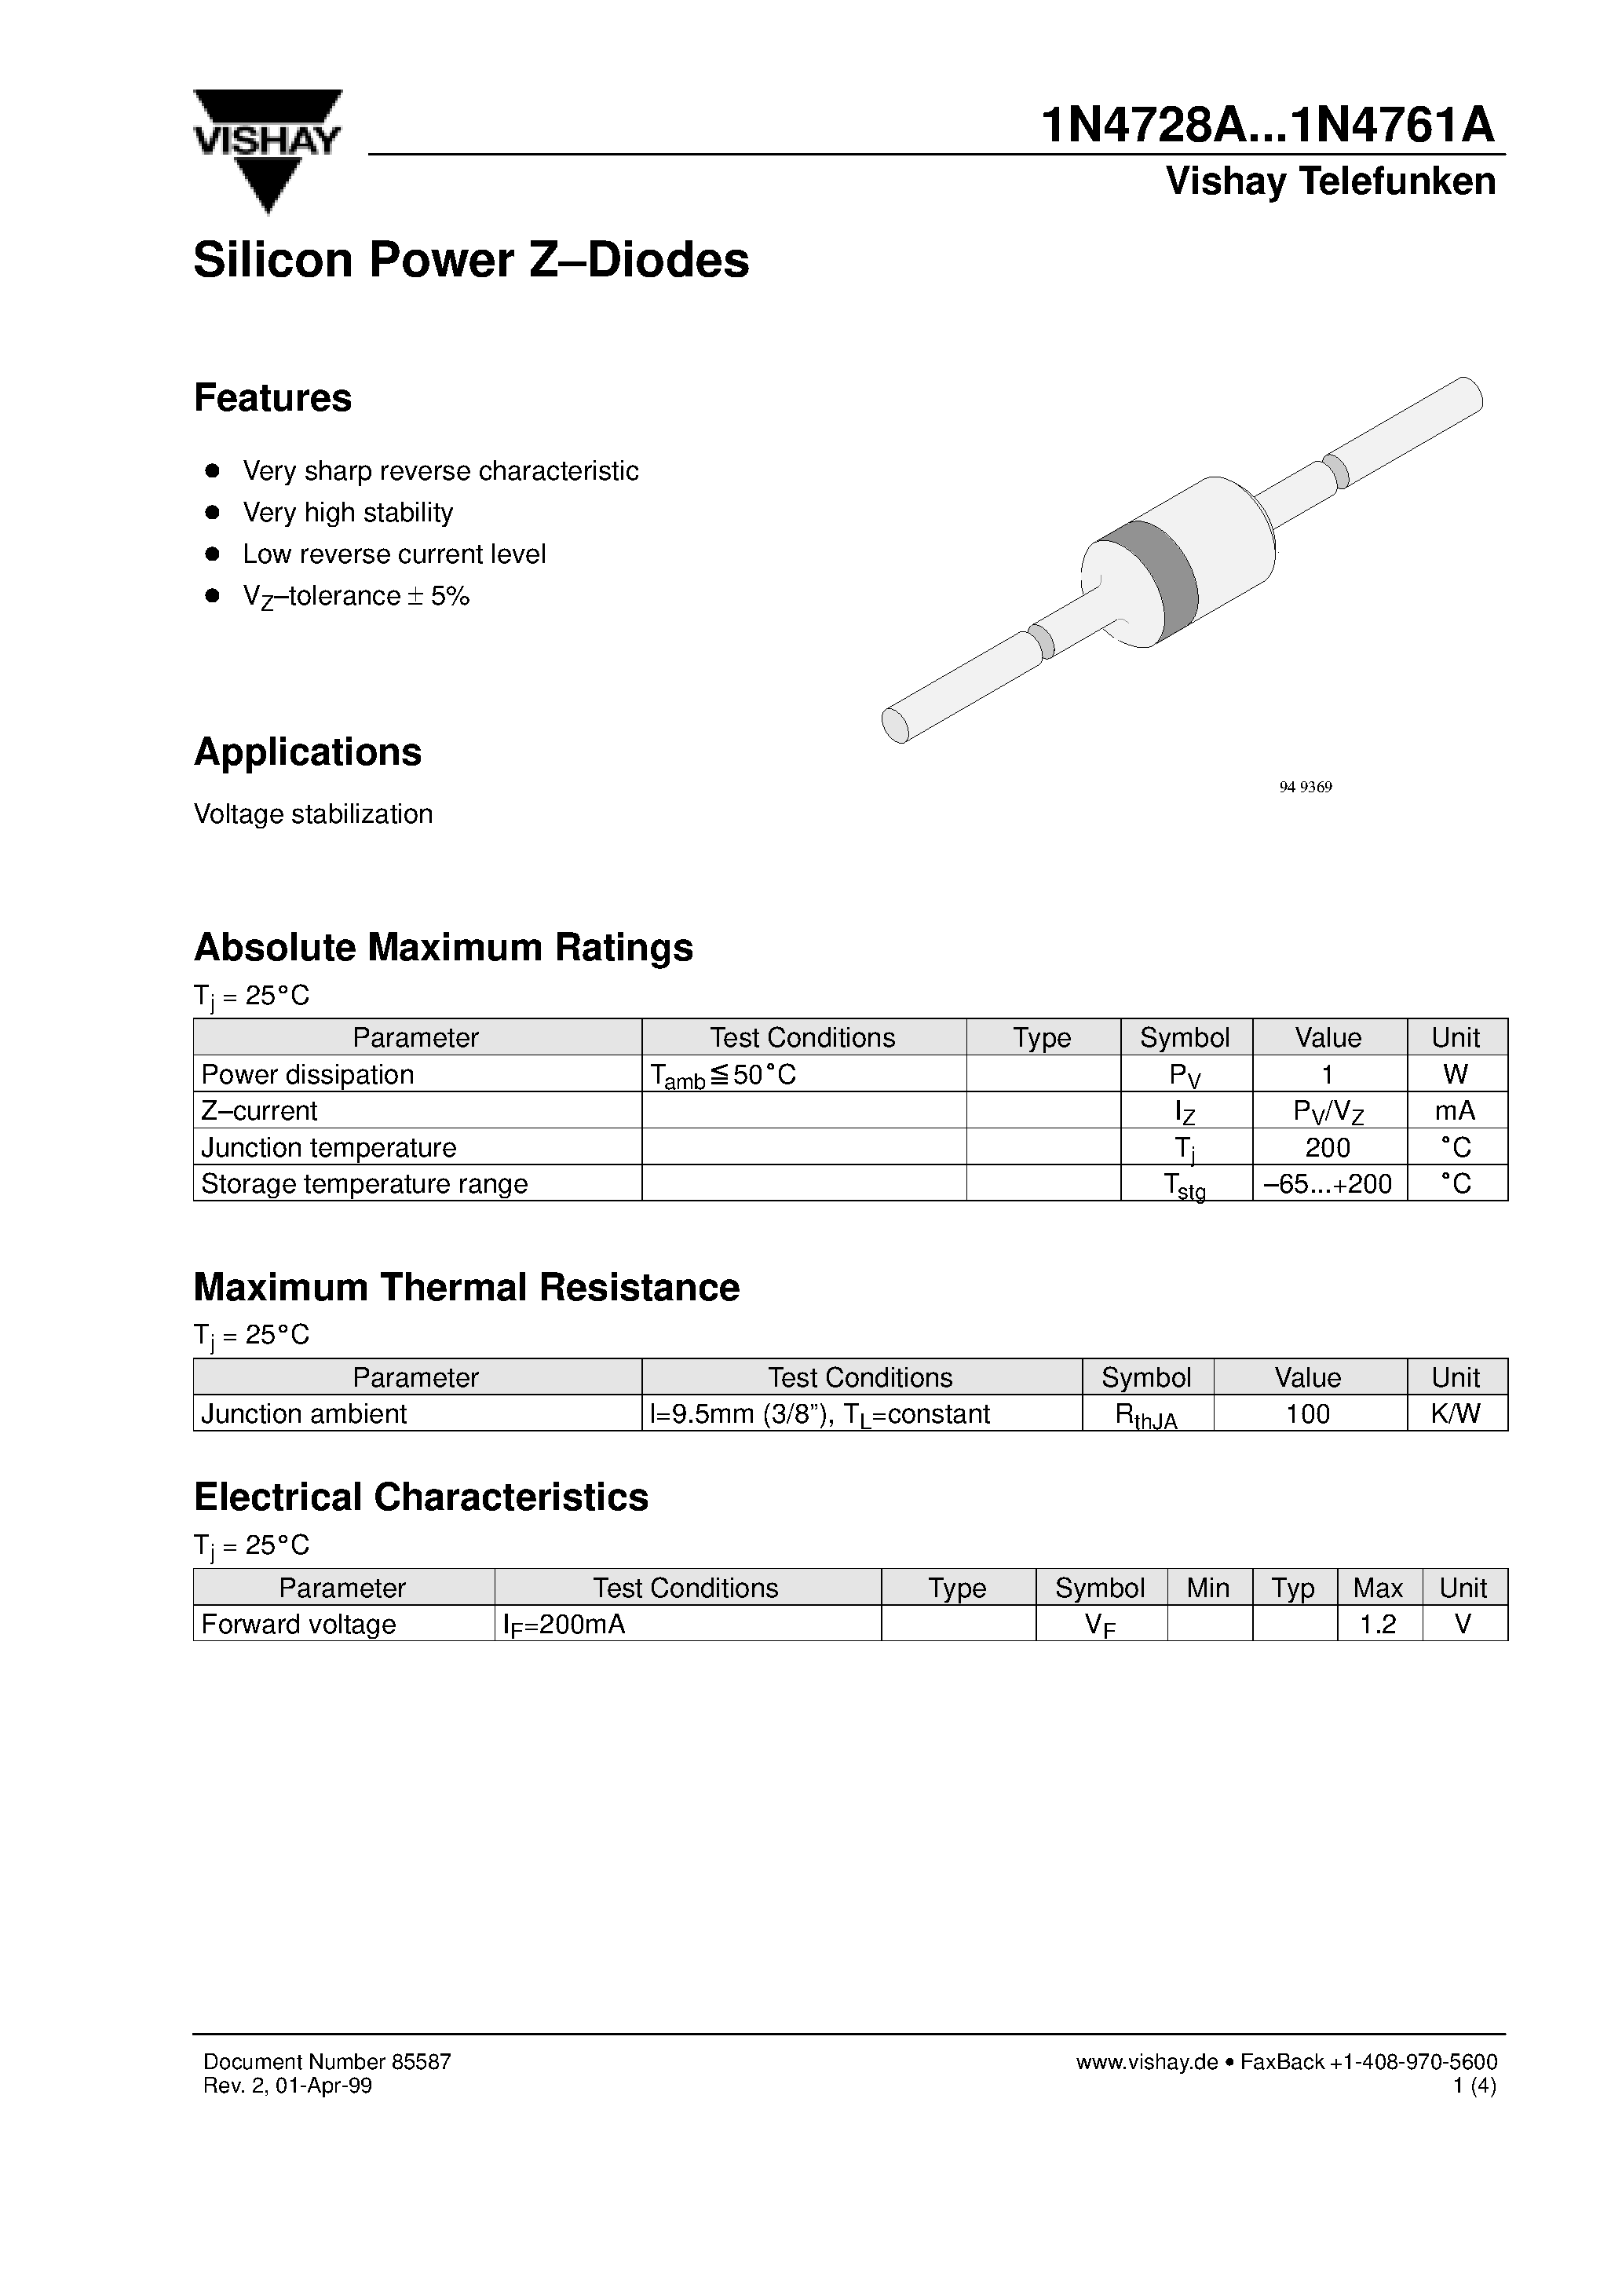 Datasheet 1N4746A - Silicon Power Z-Diodes page 1